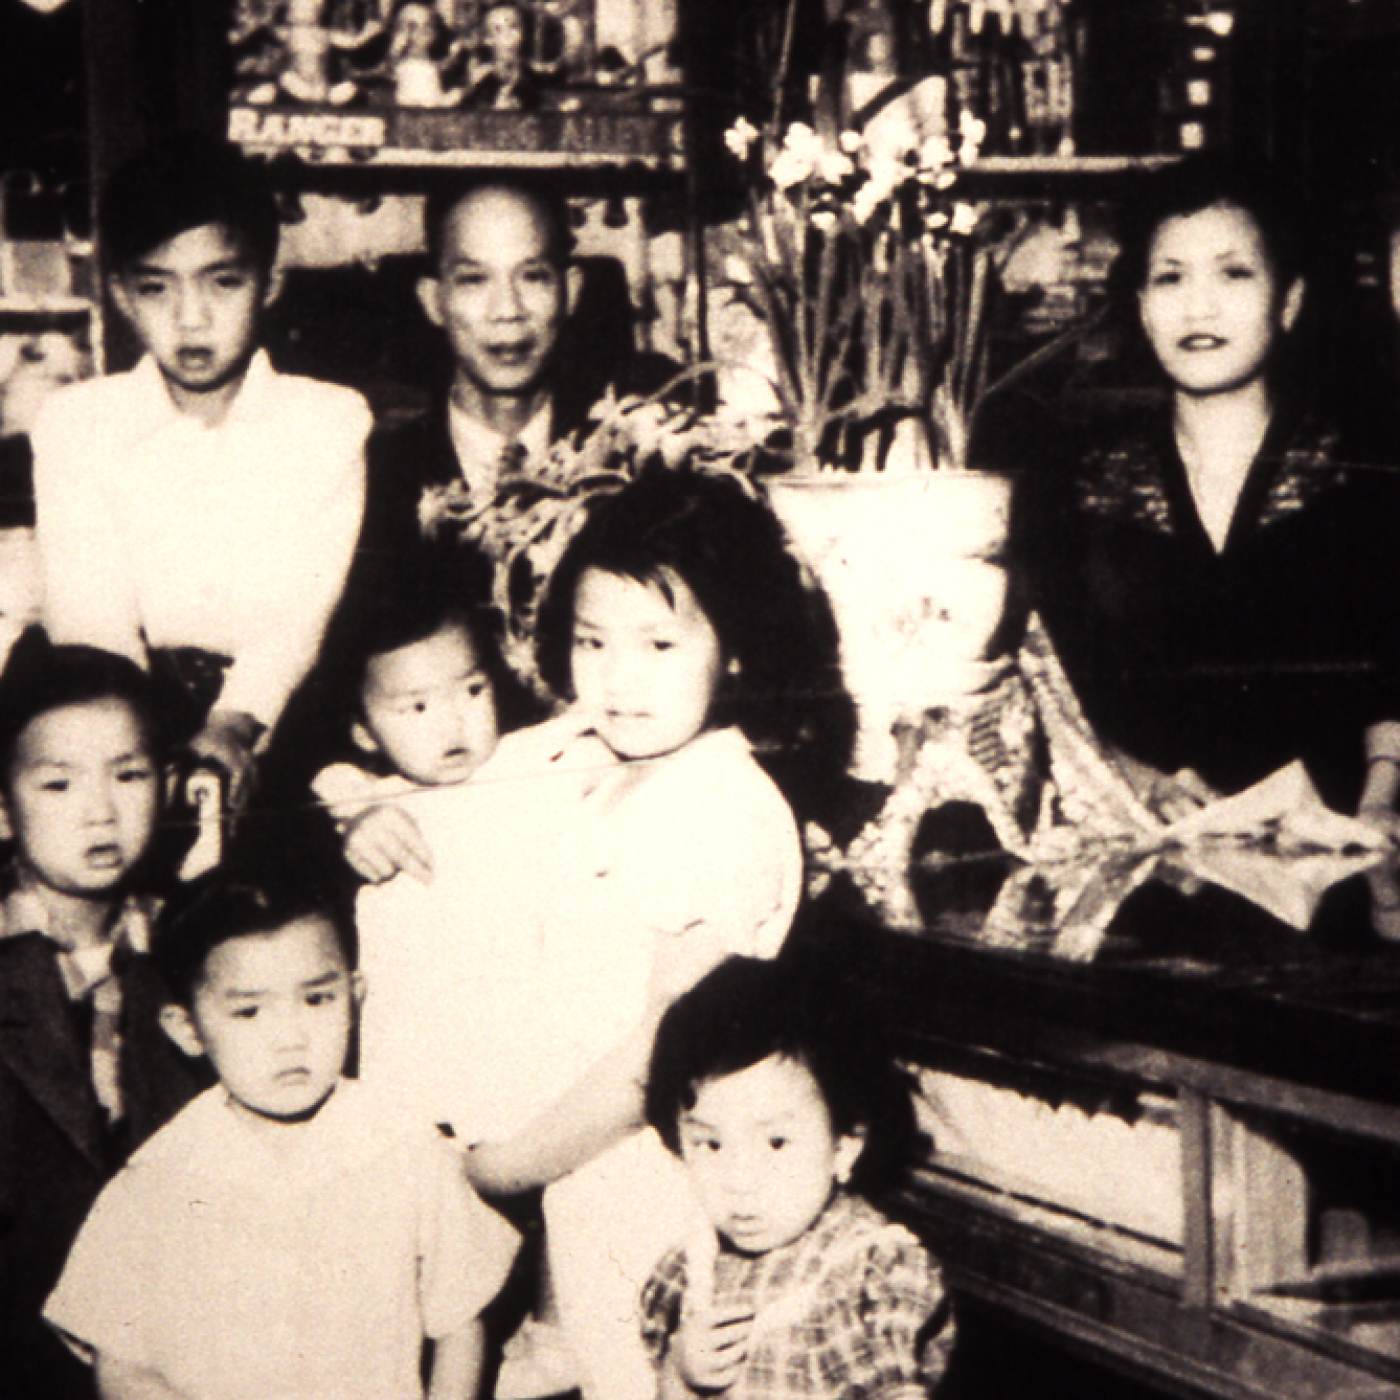 2011.031.003 Don Rodolfo Lau and family in Almacén El Bien Mutuo, 5a. avenida, Guatemala City, early 1950s. First row, left to right: Alberto, Esperanza. Second row, left to right: Armando, Amelia, Gloria. Third row, left to right: Adolfo, don Rodolfo, doña Graciela Chang de Lau. Courtesy of Amelia Lau Carling, Museum of Chinese in America (MOCA) Collection.